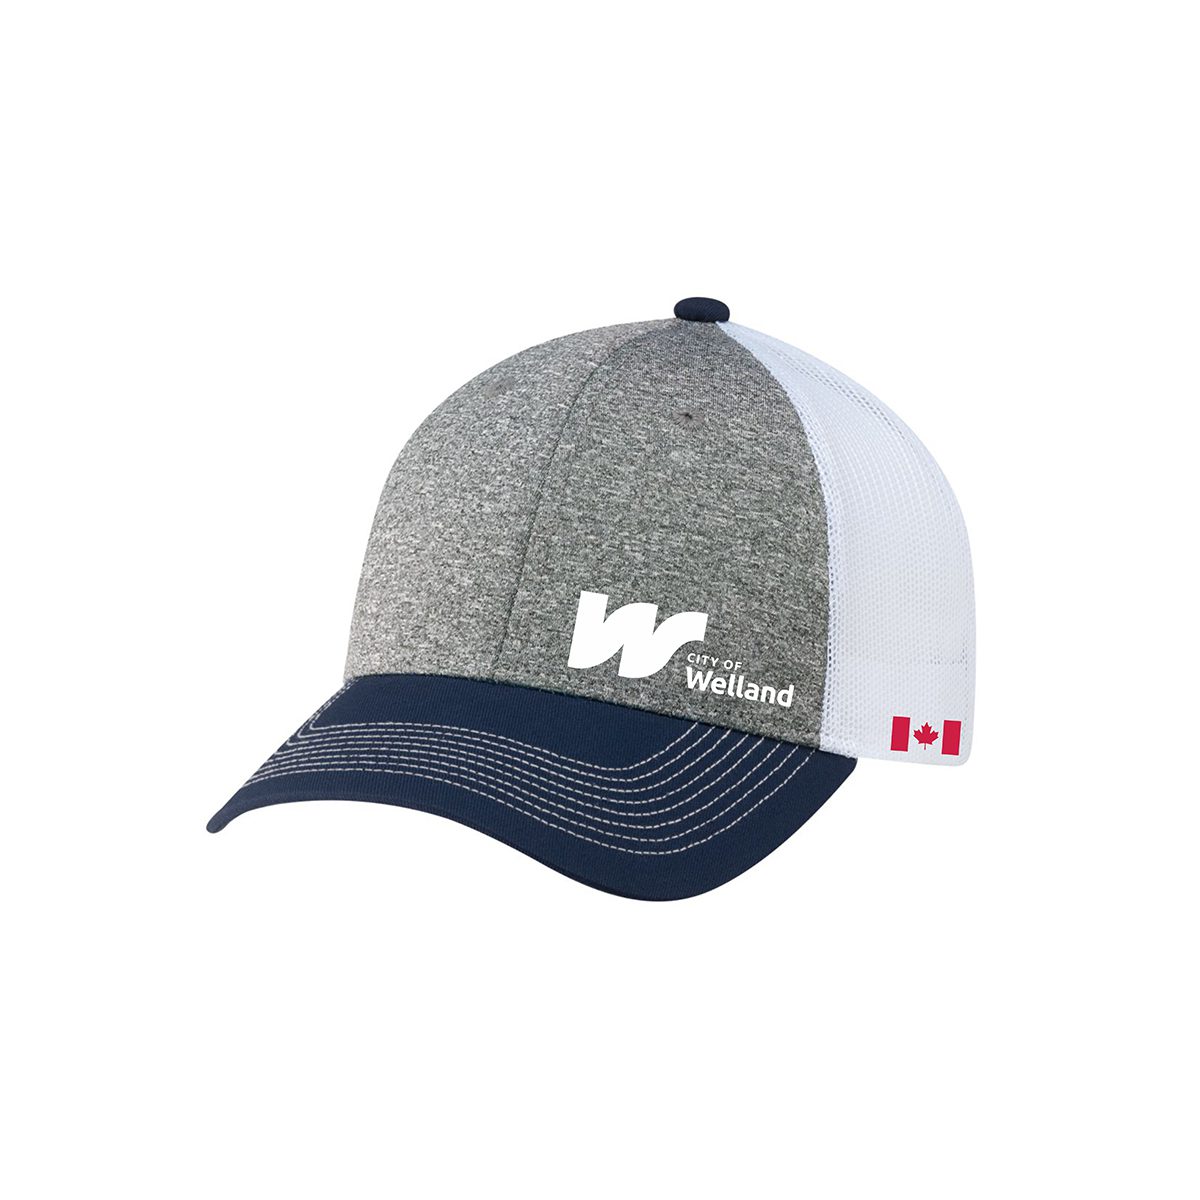 City-of-Welland-Merch-Store_V9-4G645M-Navy-Charcoal--White-with--White-HORIZONTAL-CITY-OF-WELLAND-LOGO-LEFT-PANEL